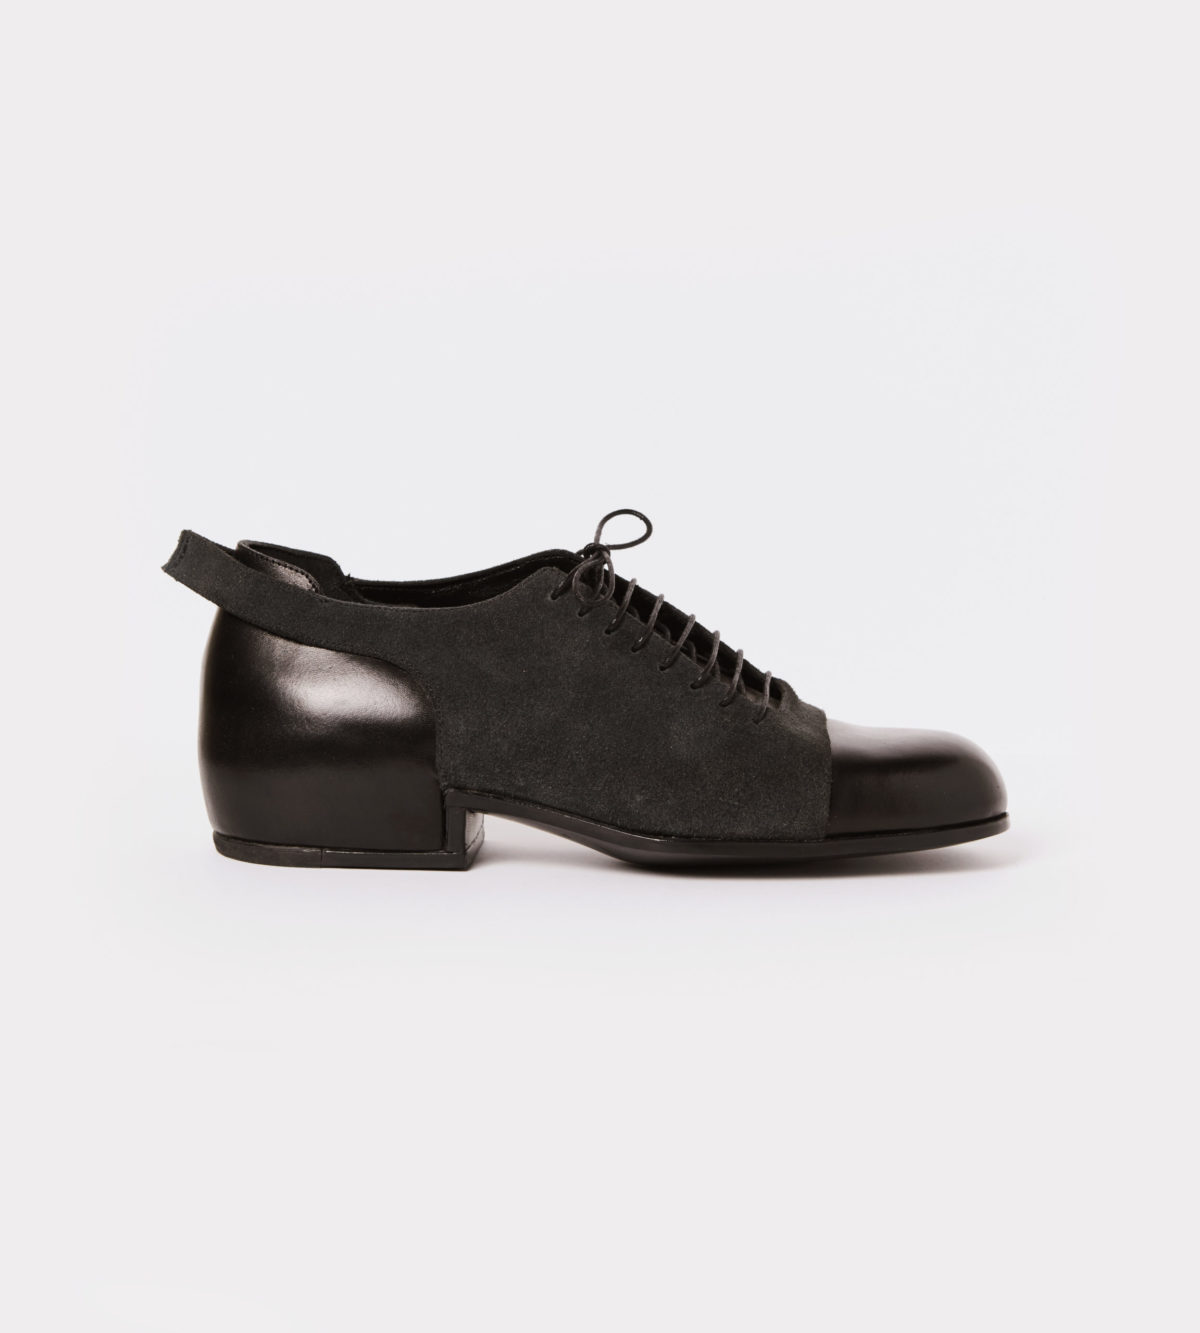 Handmade black leather-suede lace up shoe - rigth